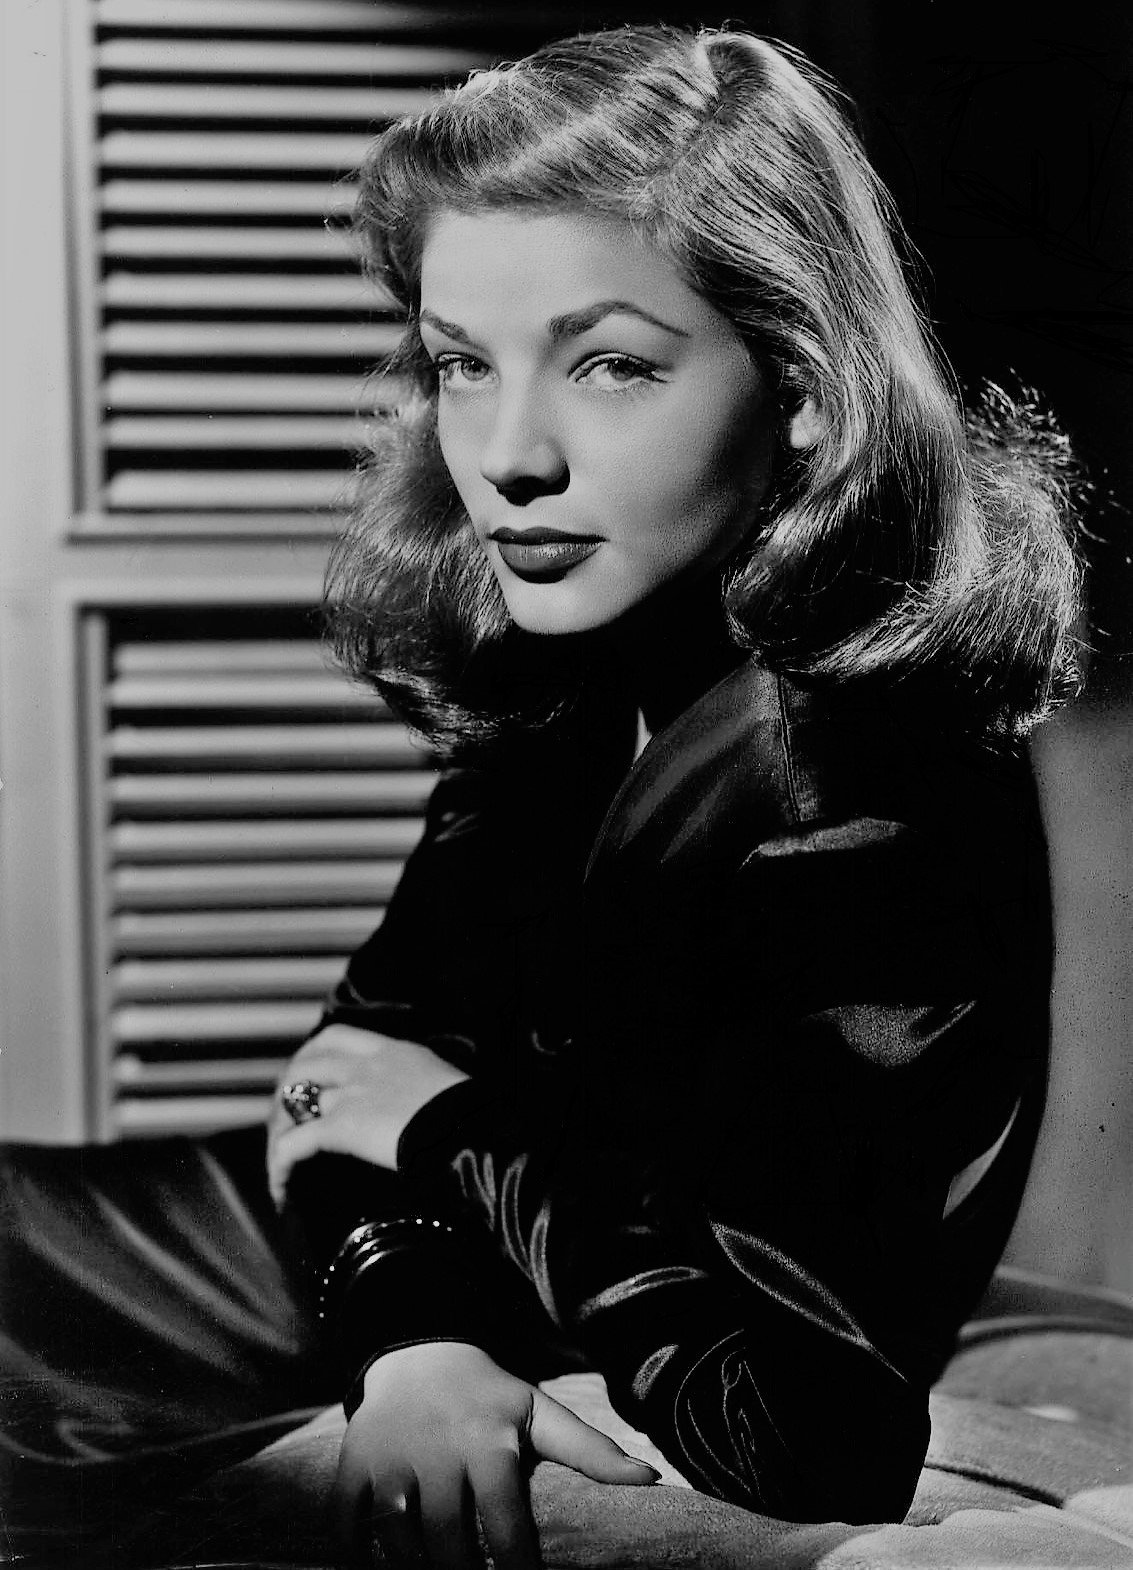 gatabella:
“Lauren Bacall, To Have and Have Not, 1944
”
Lauren “Slim” Bacall, age 19